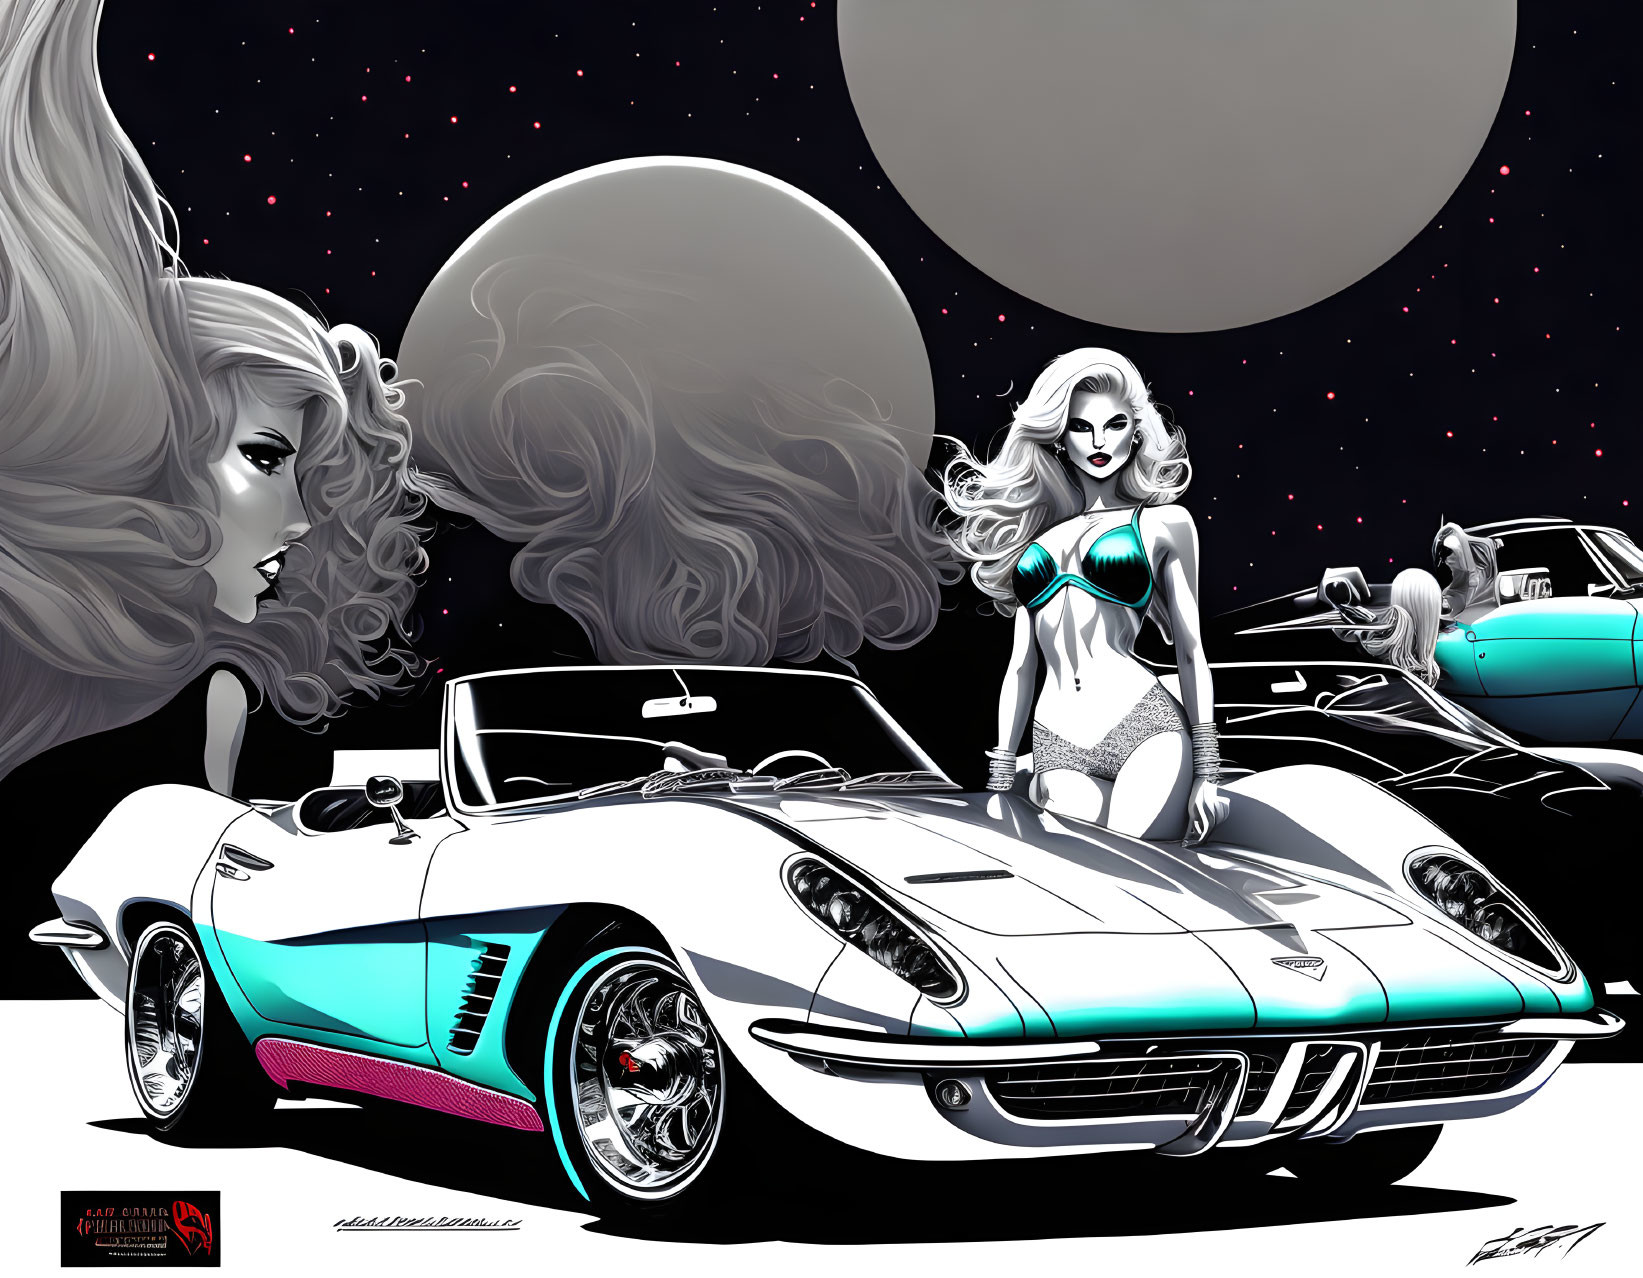 Stylized illustration of woman by classic convertible with retro-futuristic elements and space-themed backdrop.